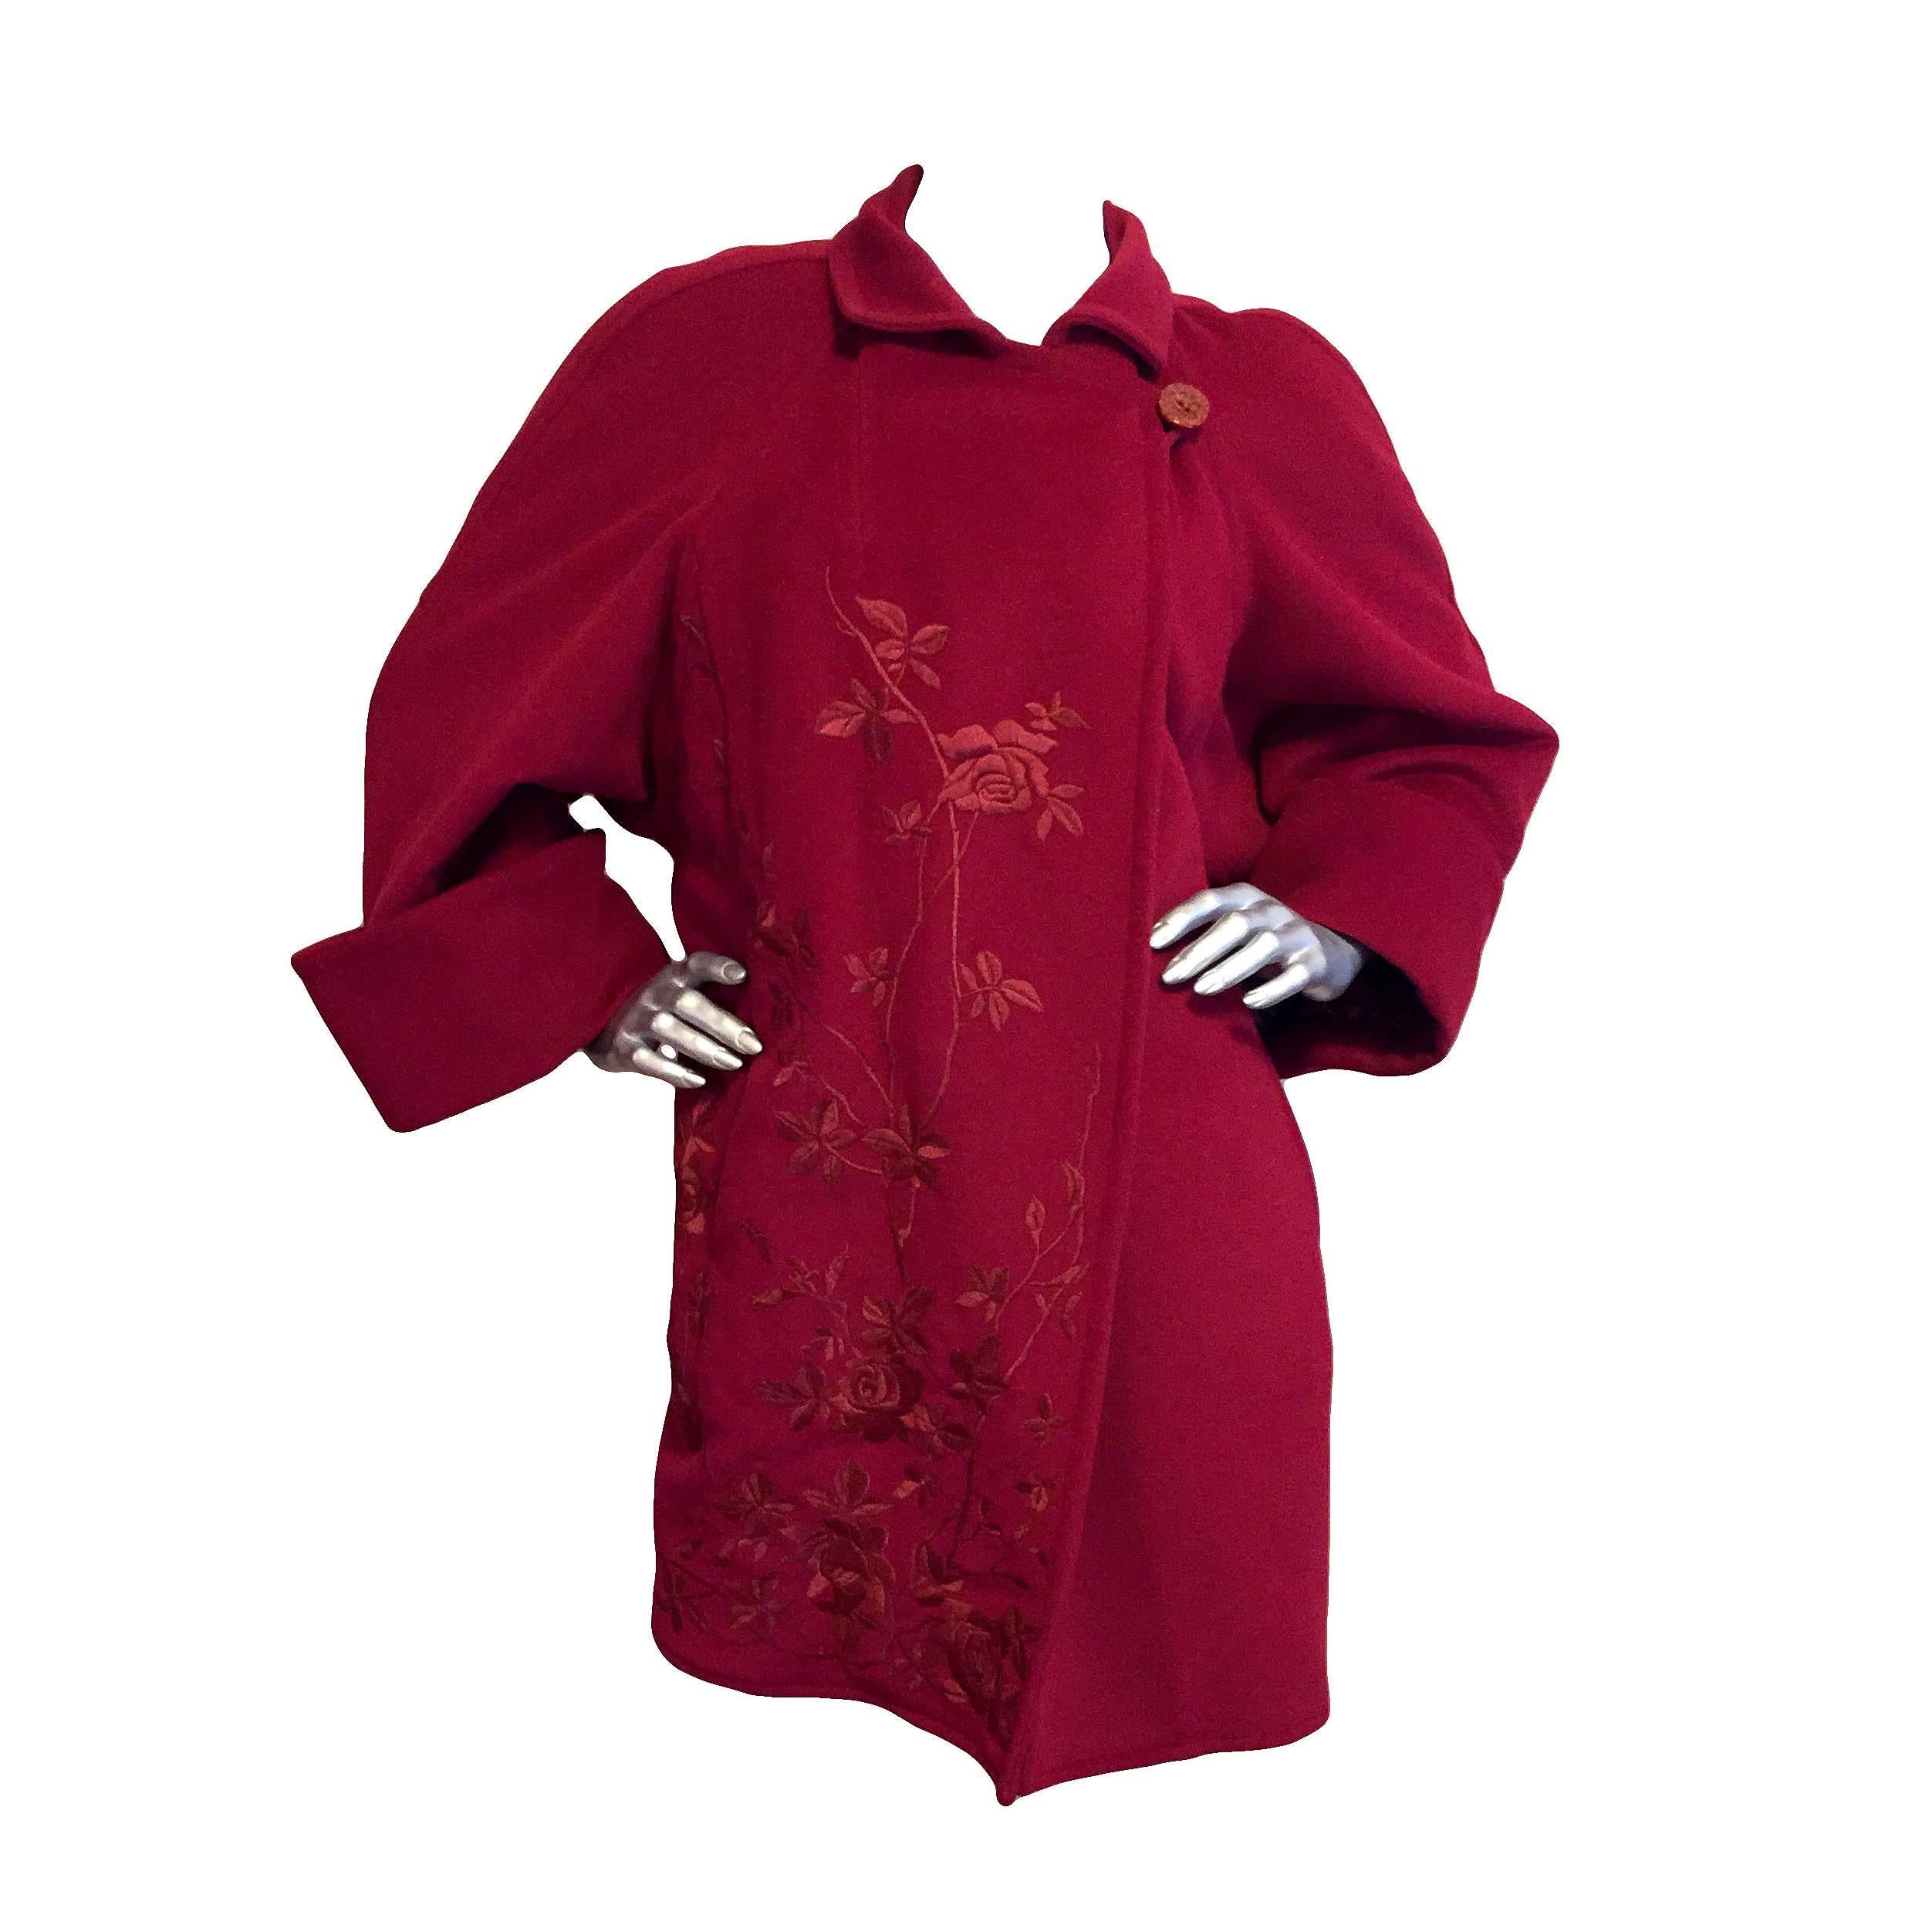 Elegant Christian Lacroix Wool Coat With Embroidery, 1980s For Sale